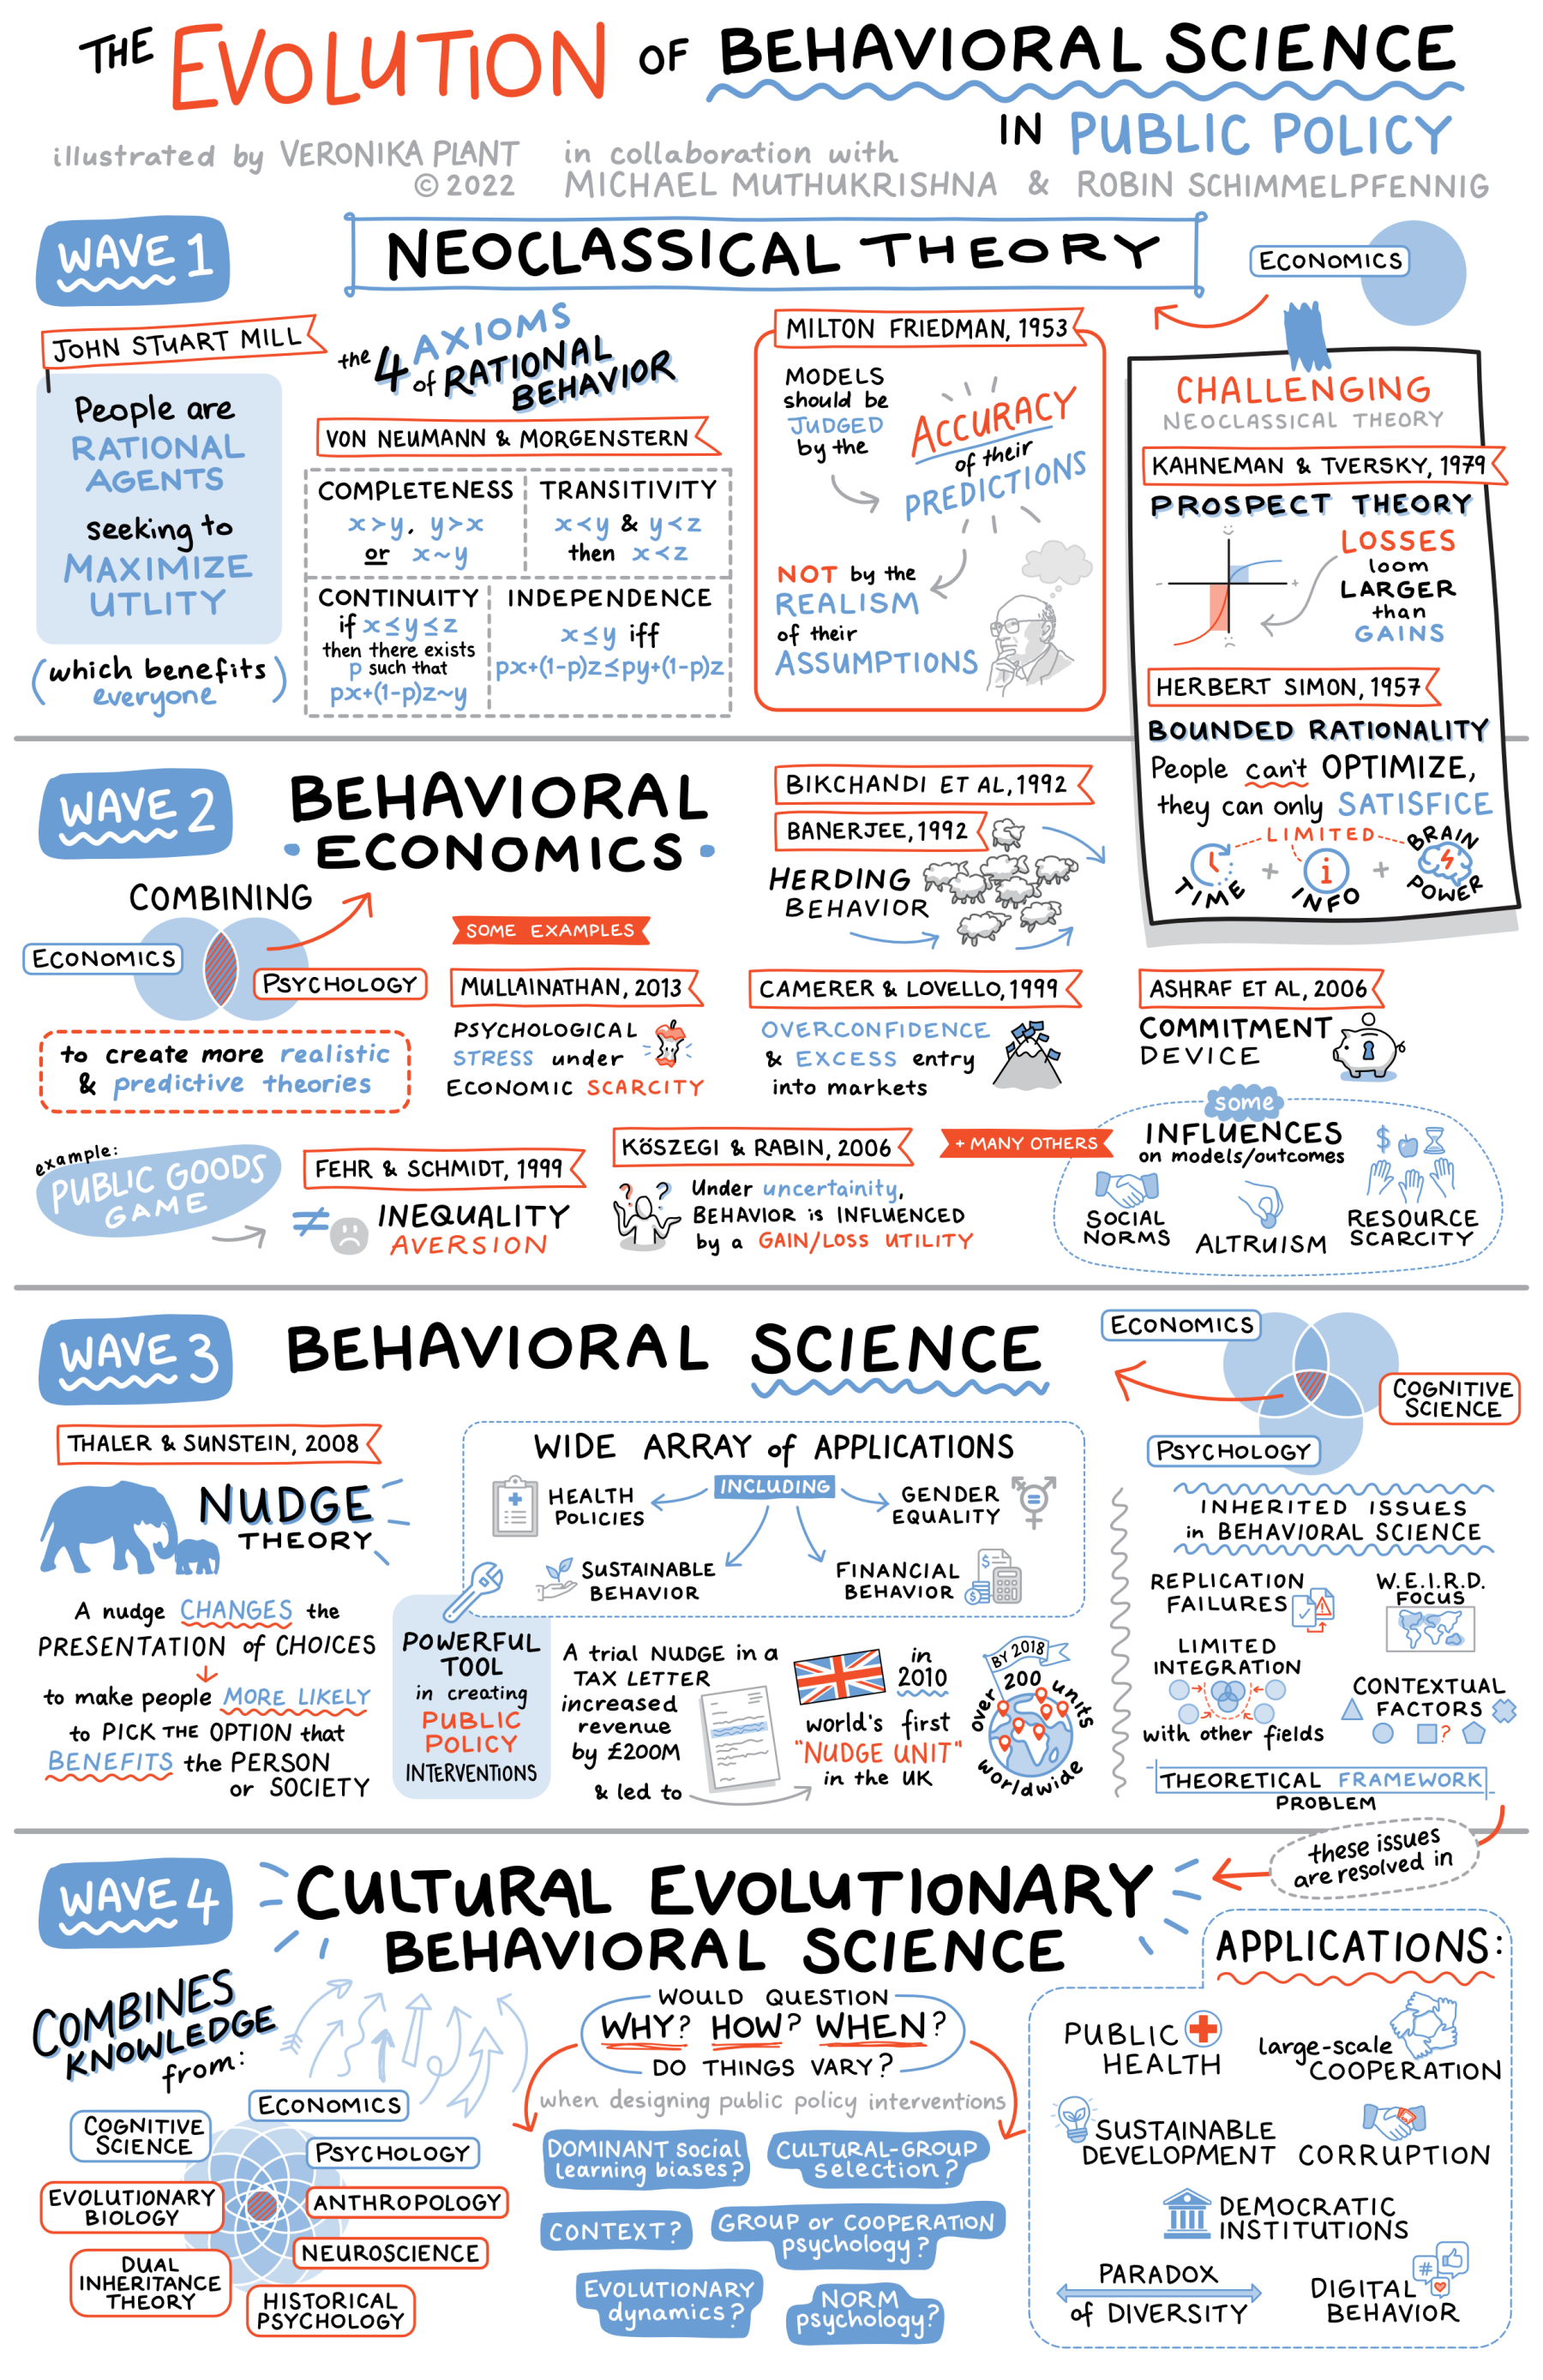 The Evolution of Behavioral Science illustration by Veronika Plant - corrected date